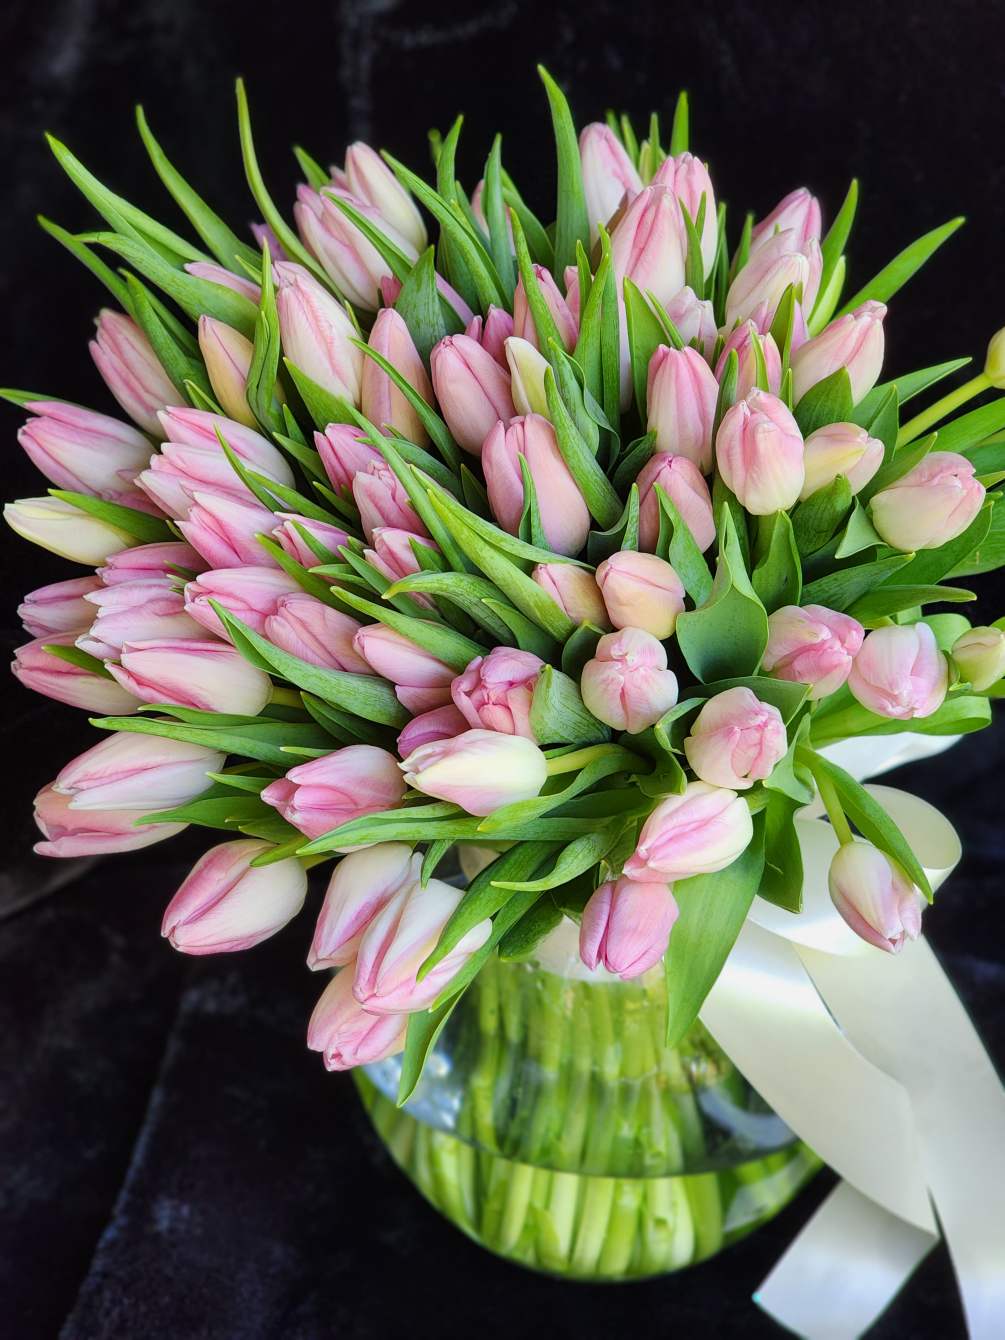 Tulips are one of the most romantic flowers, as they look very